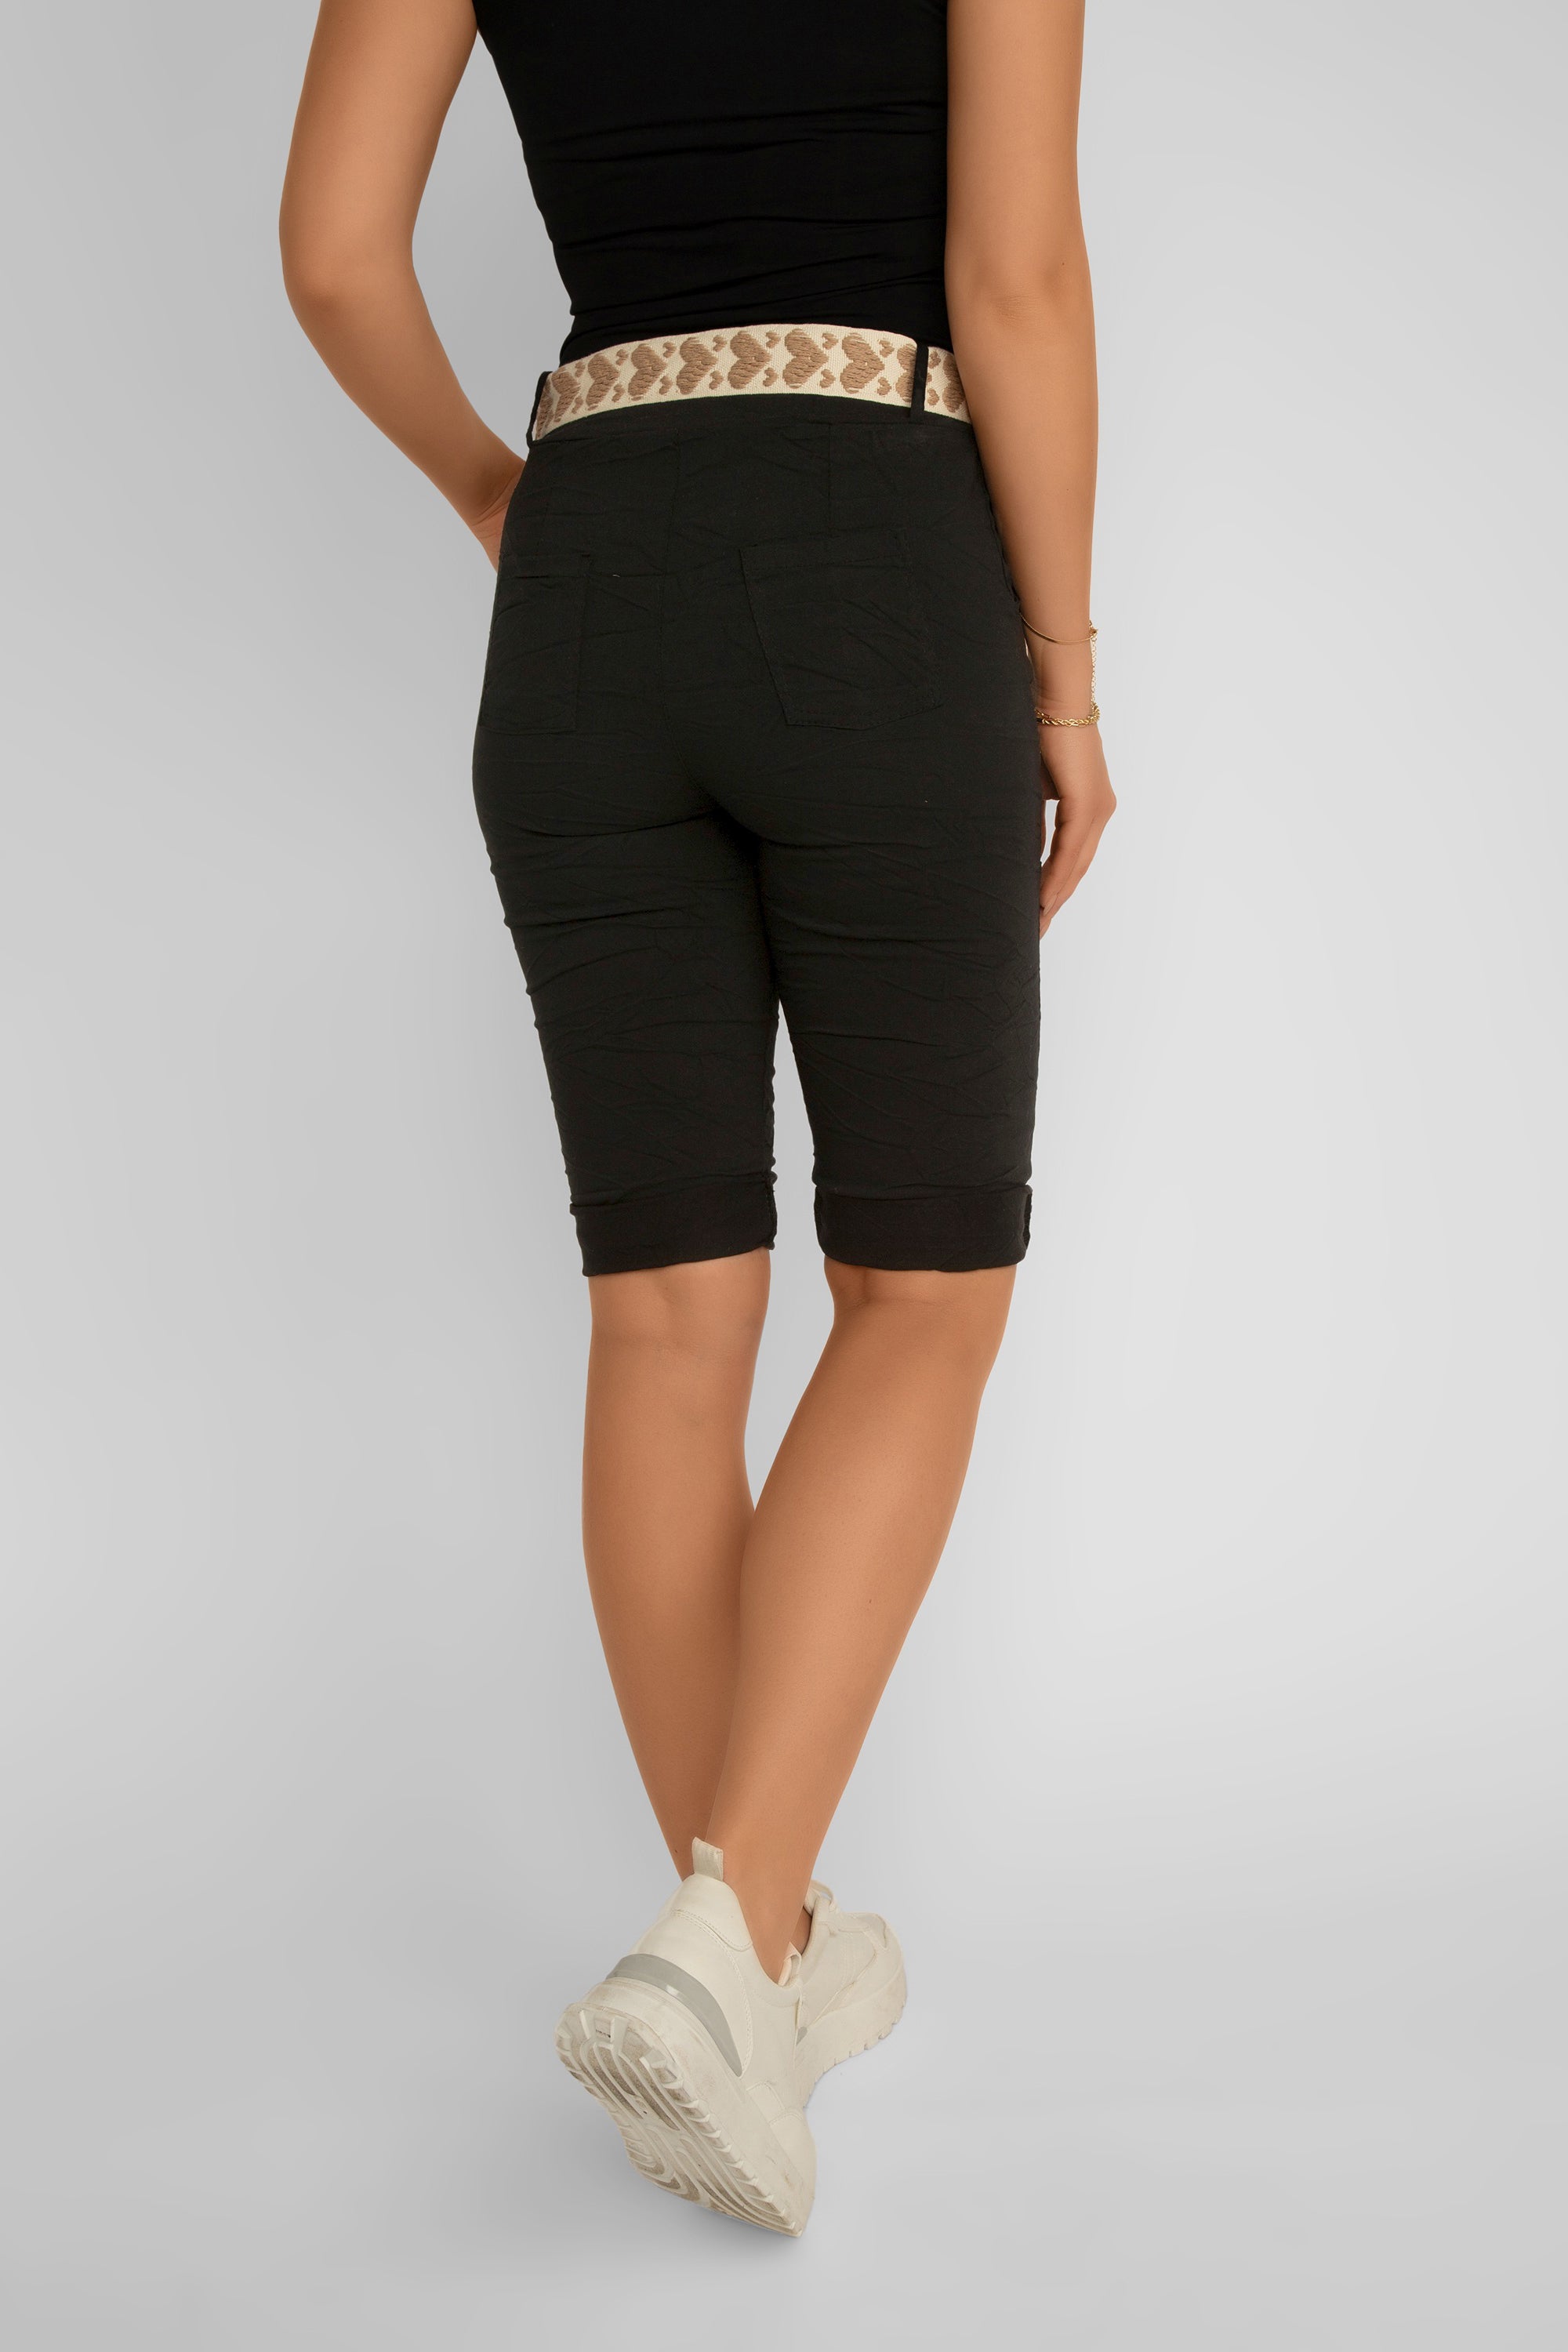 Back view of Elissia (L21139) Women's Crinkle Fabric Bermuda Shorts With Heart Belt and Rolled Hem in Black